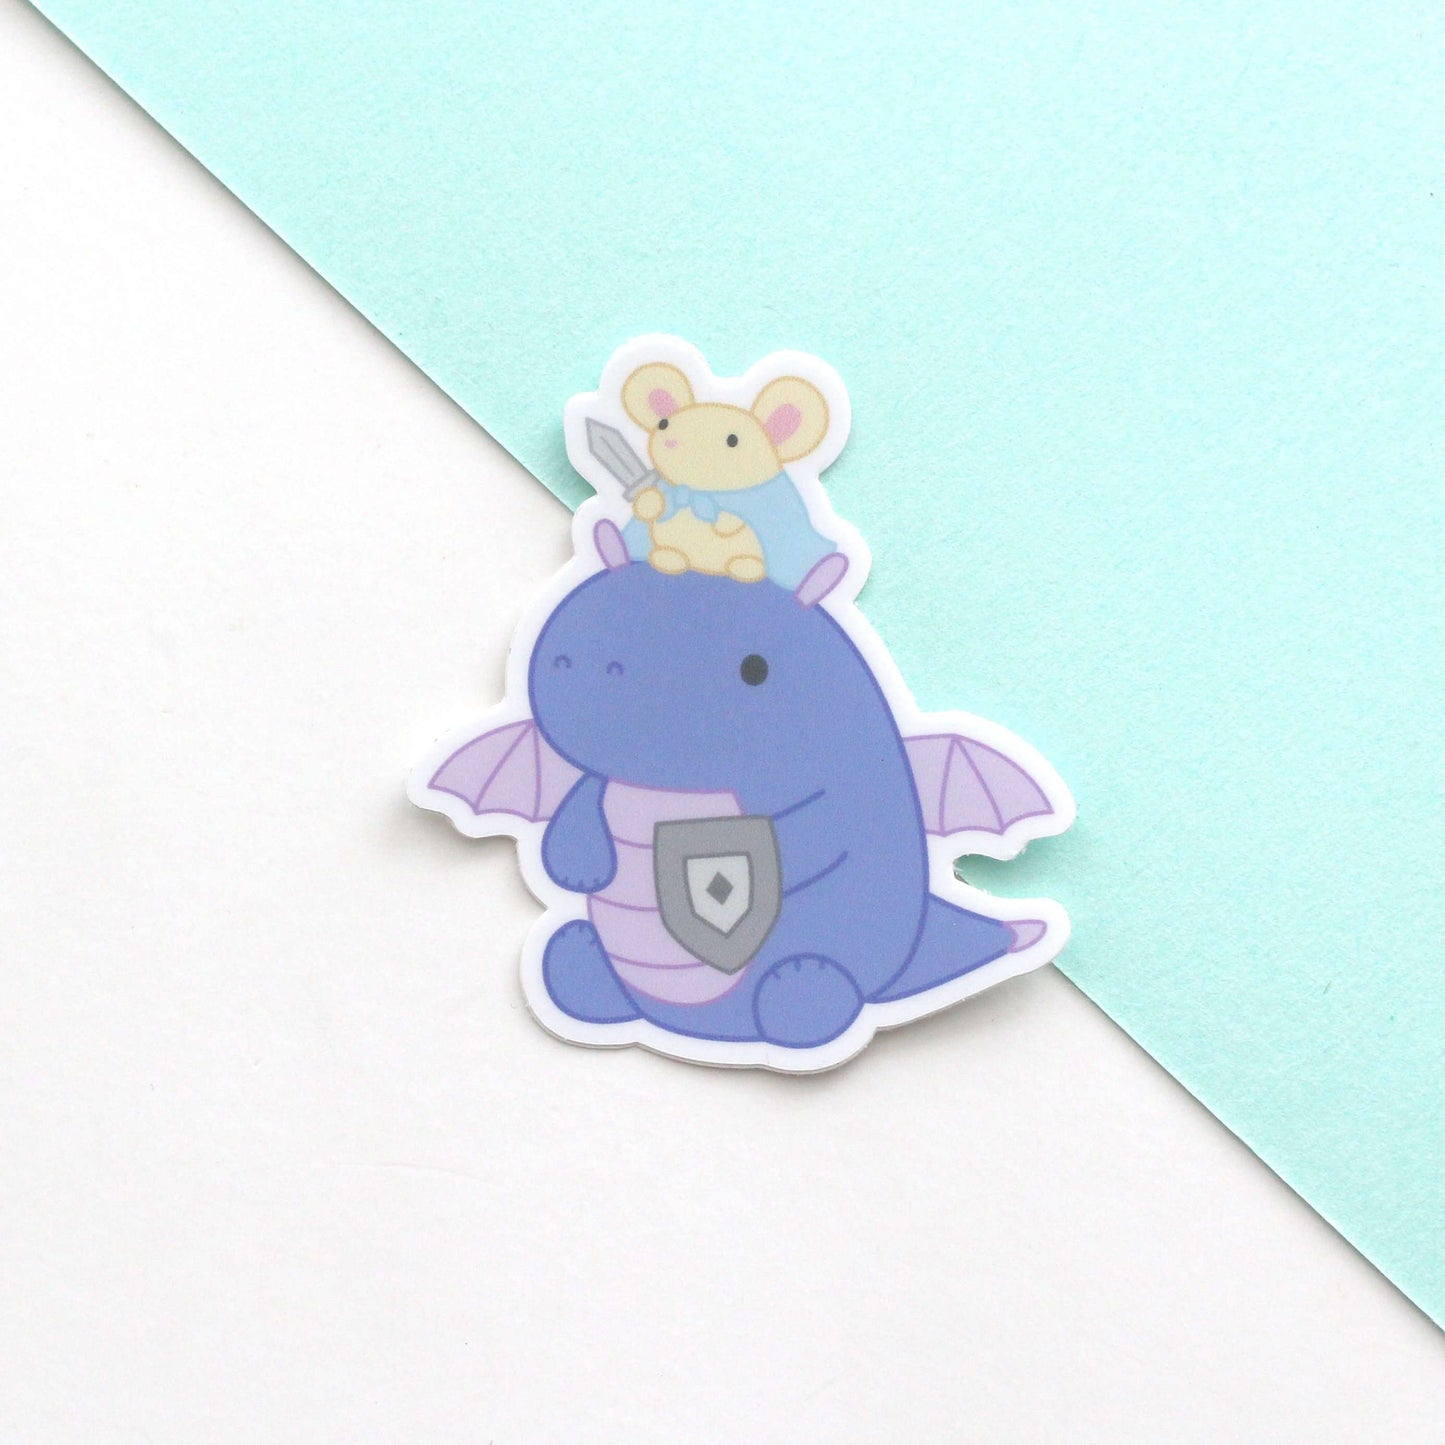 Mouse and Purple Dragon Vinyl Sticker - Cute Mouse Sticker - Dragon Stationery by Wild Whimsy Woolies